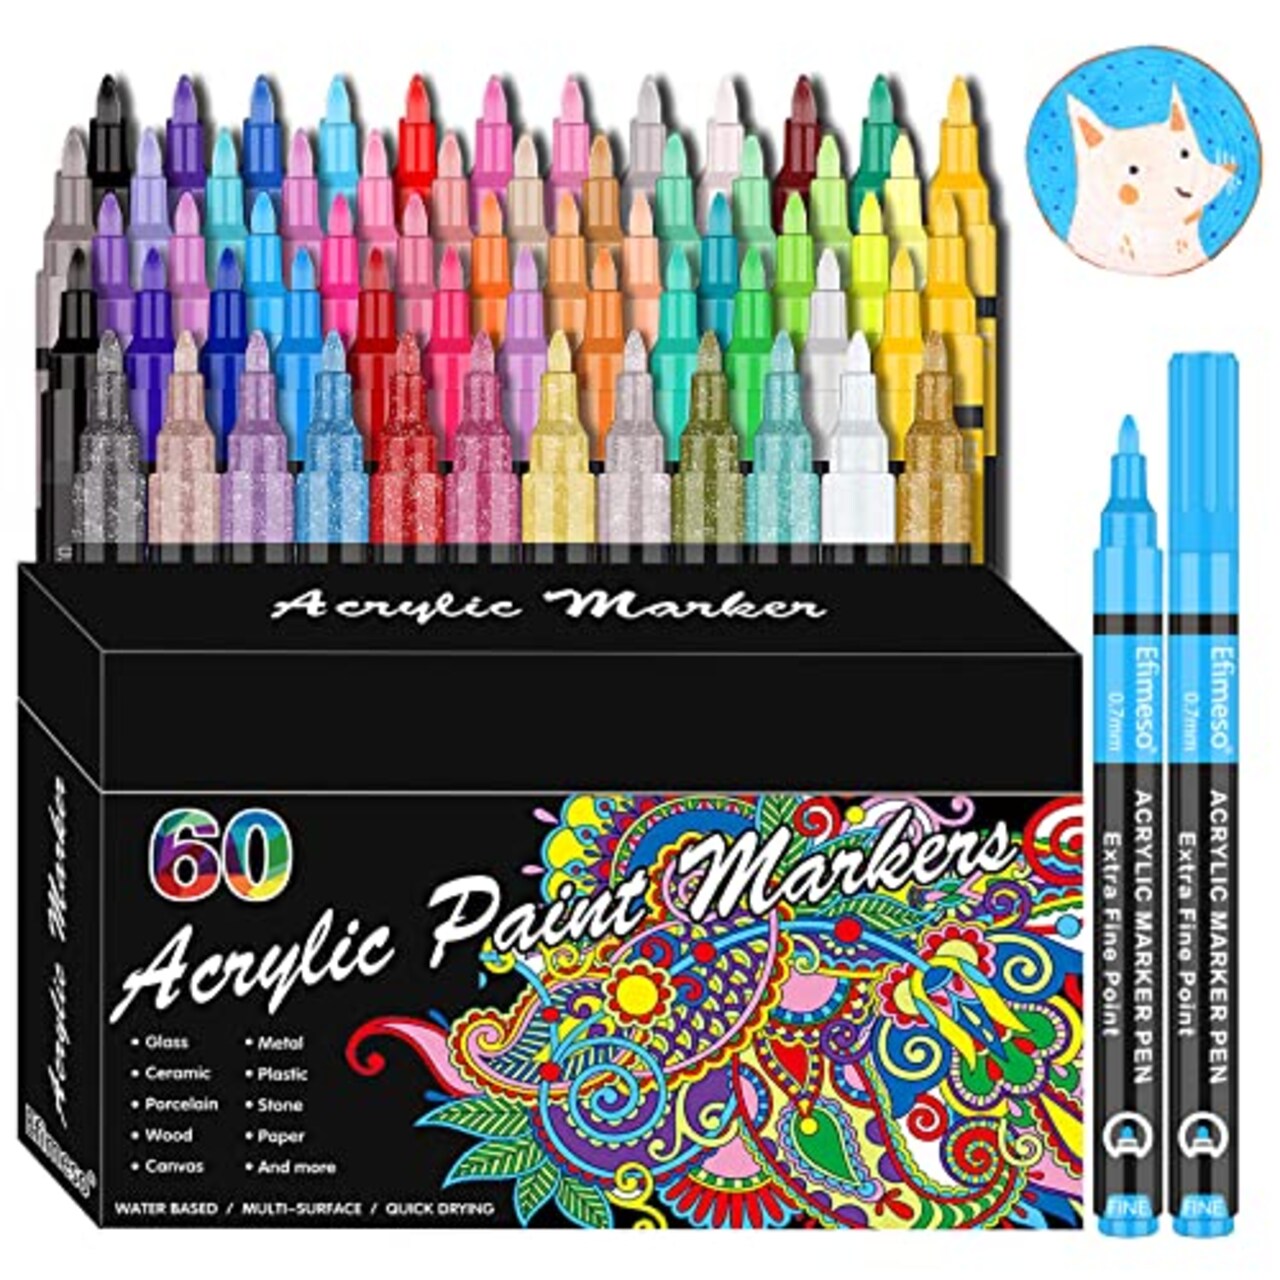 RESTLY Acrylic Paint Pens, 60 Colors Acrylic Paint Marker, 0.7mm Extra Fine Paint  Pens for Canvas, Rock Painting, Wood, Glass, Metal, Ceramic, stone